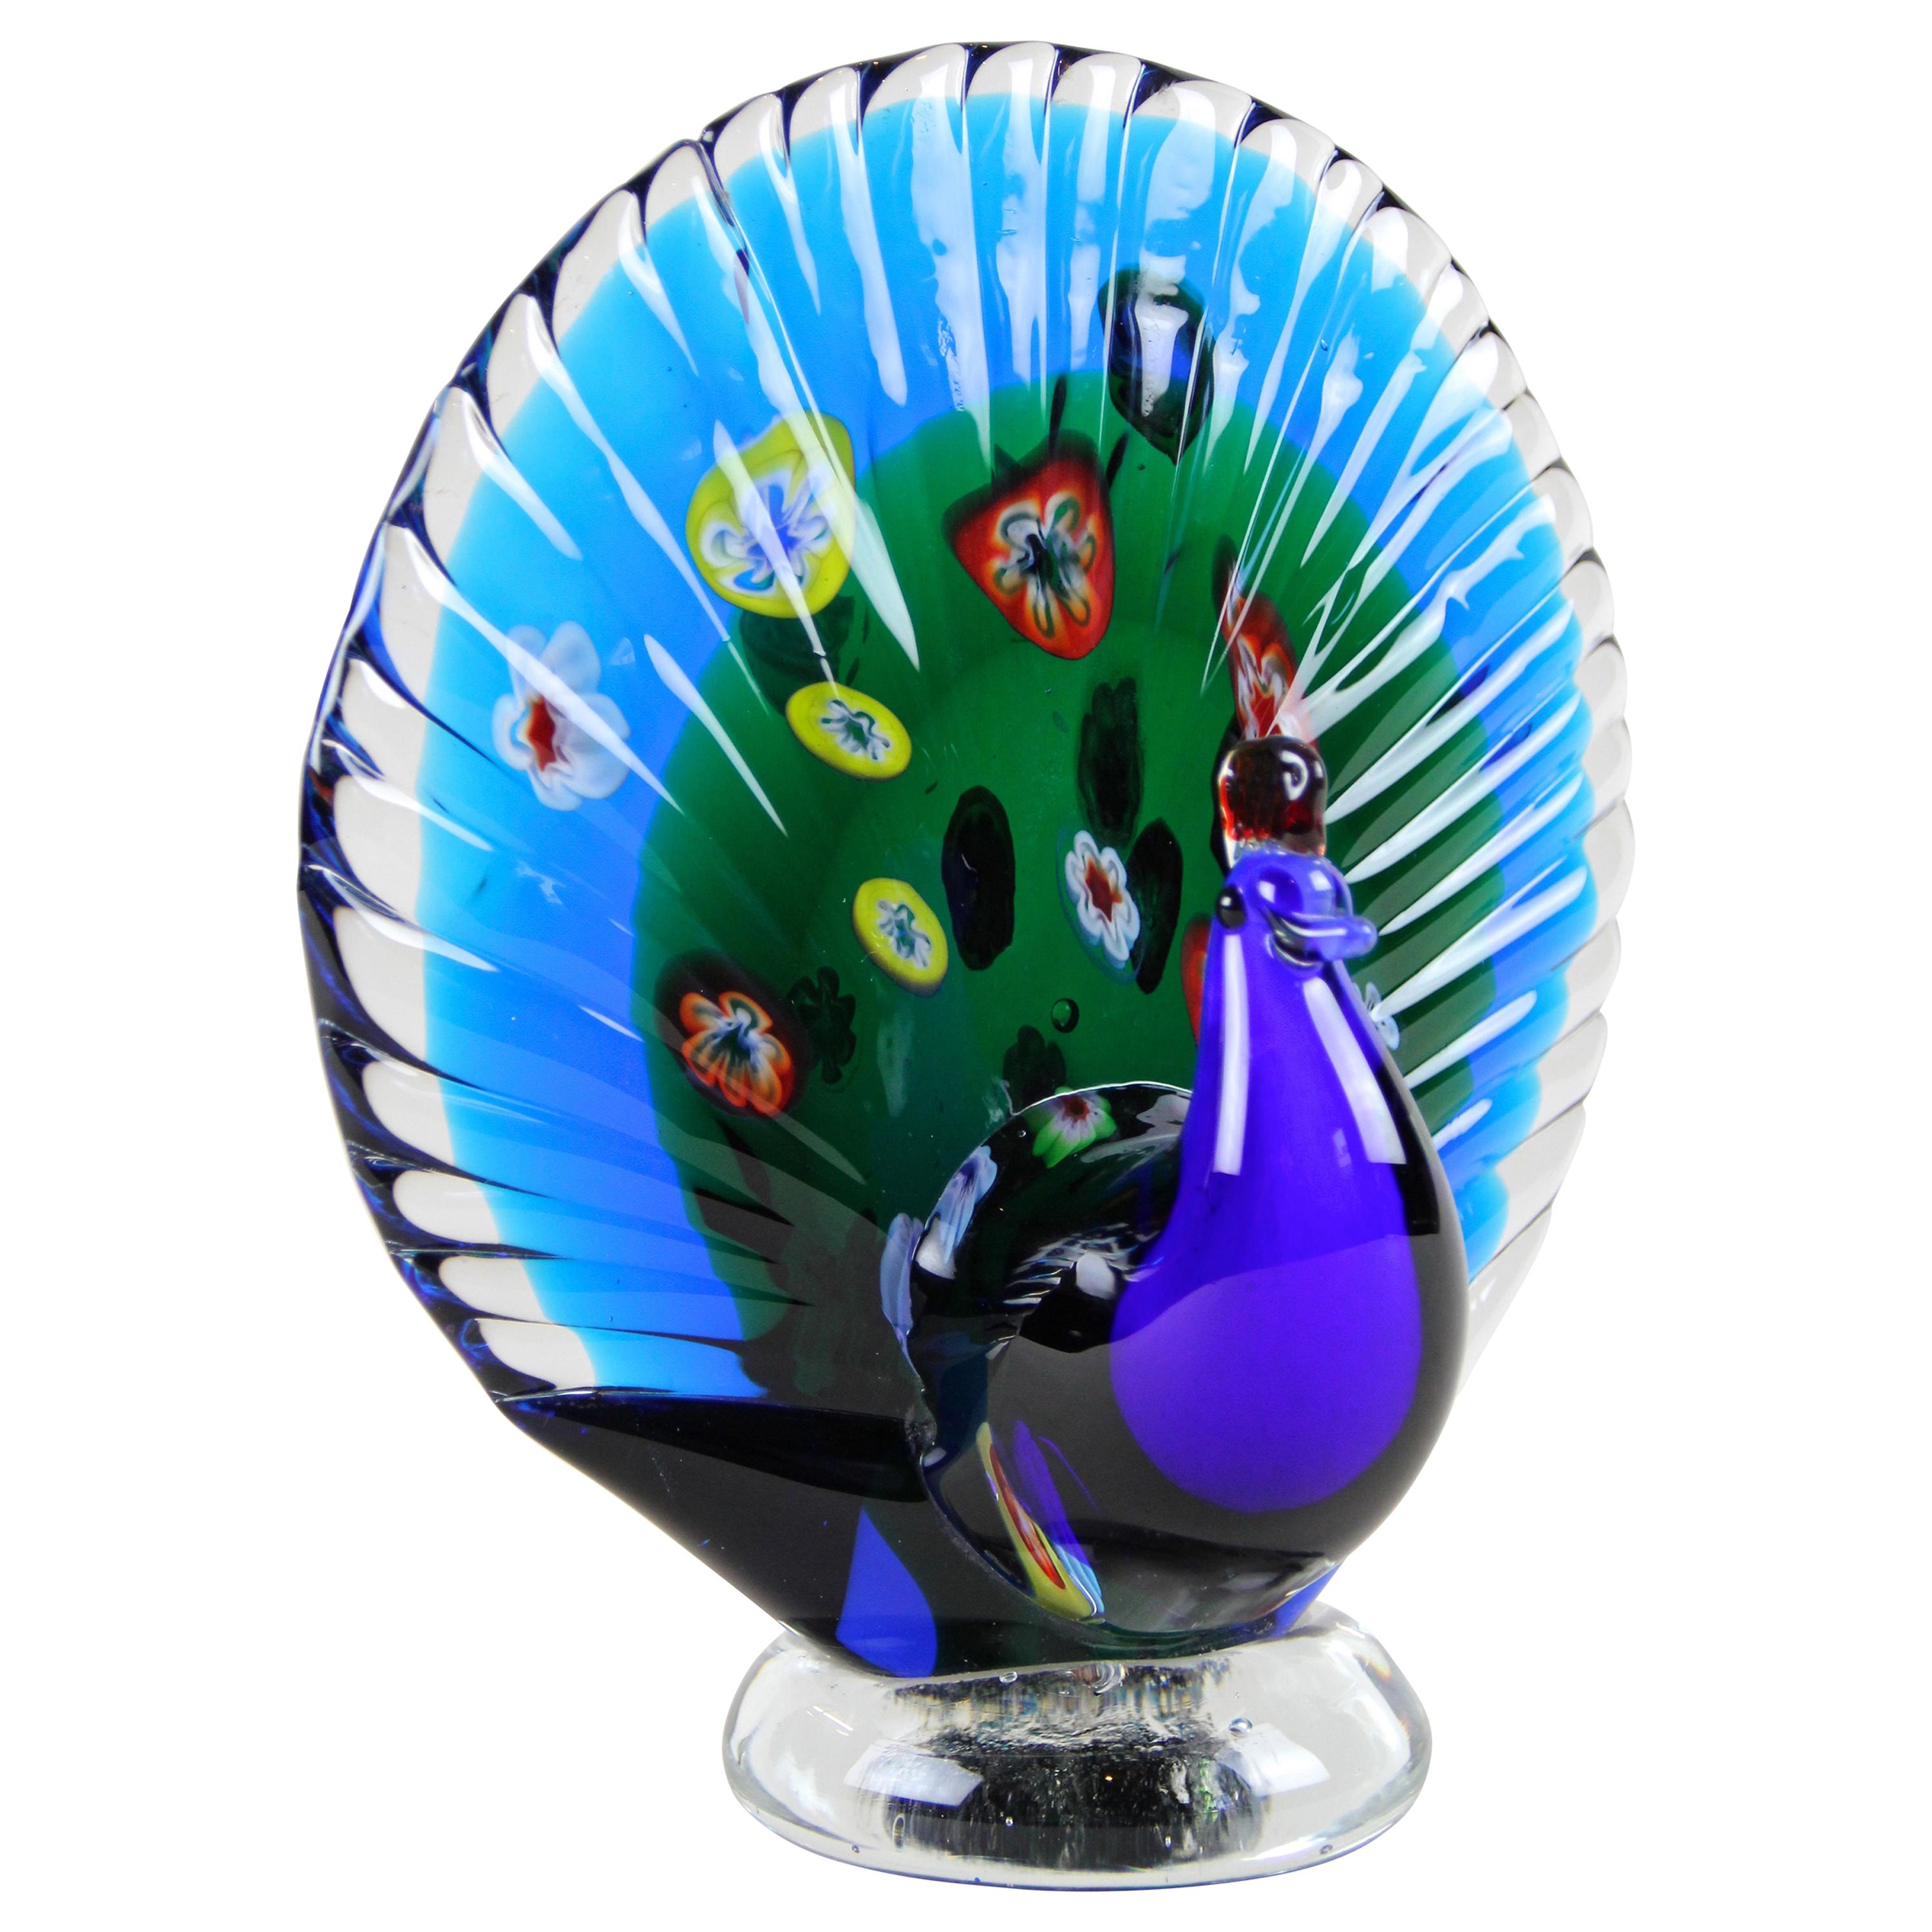 Home Locomotion Peacock Inspired Art Glass Sculpture 849179026240 for sale online 